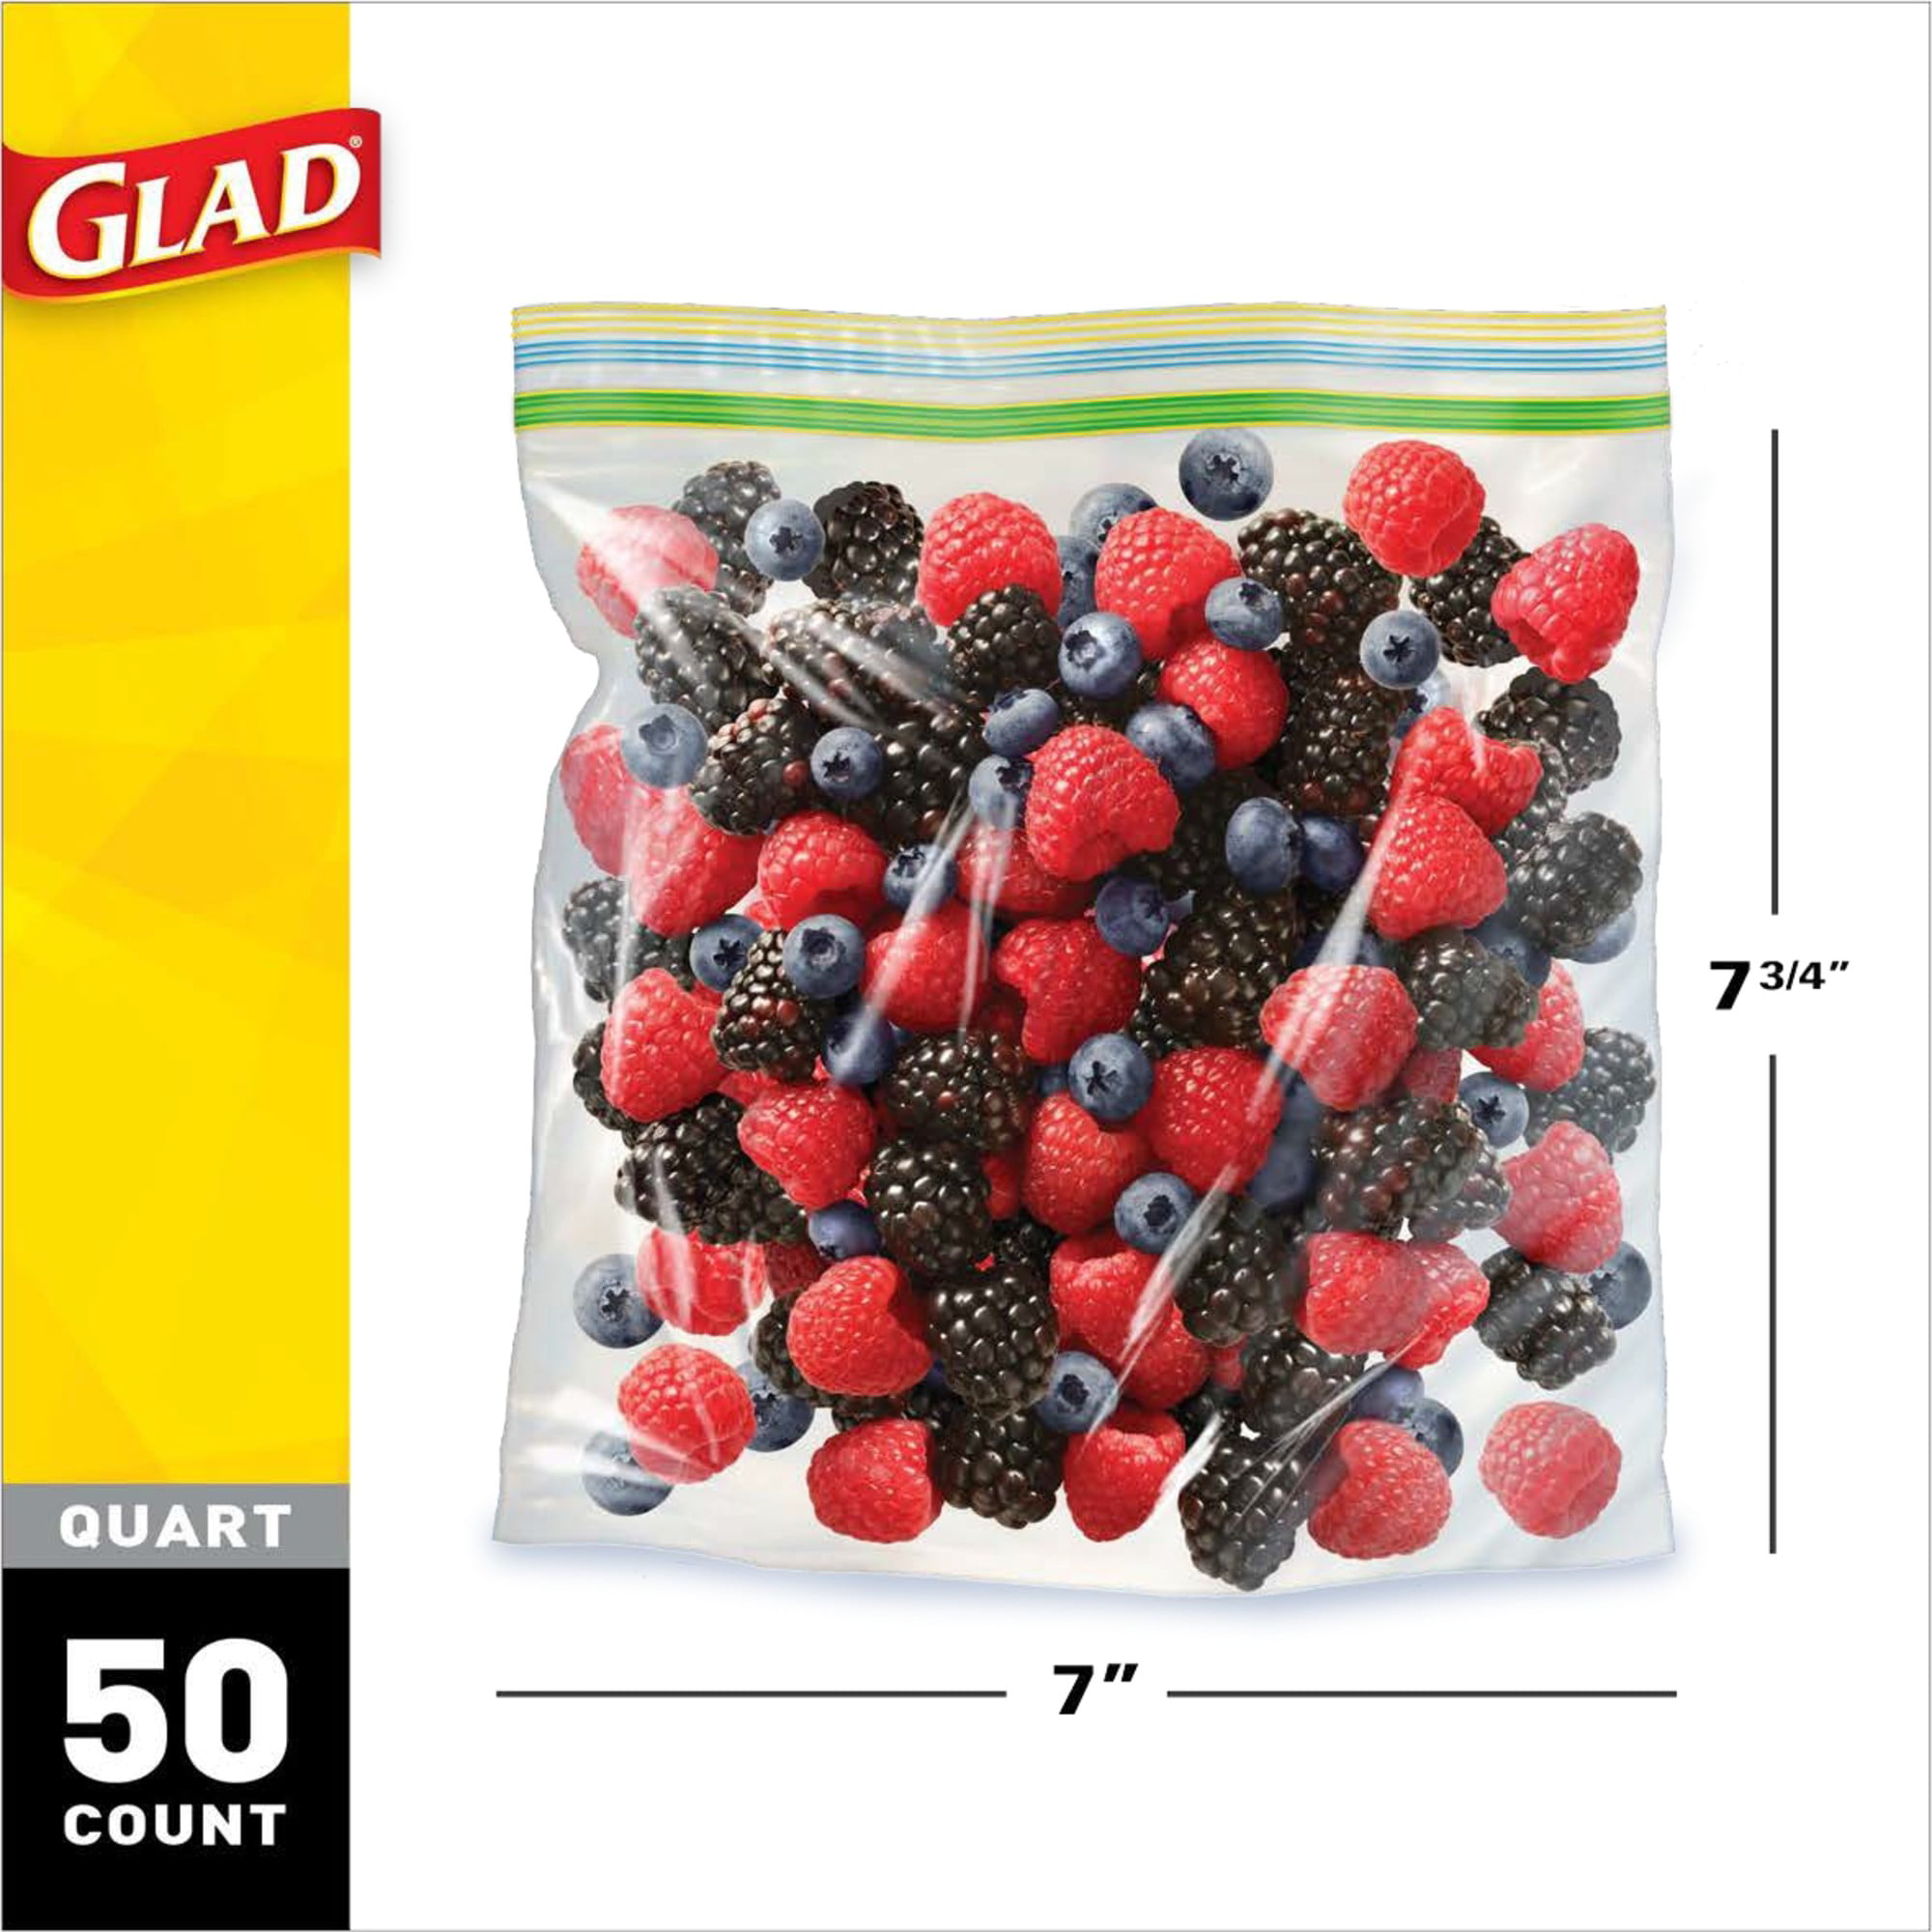 Glad Zipper Food Storage Plastic Bags - Quart - 50 Count (Packaging May  Vary)